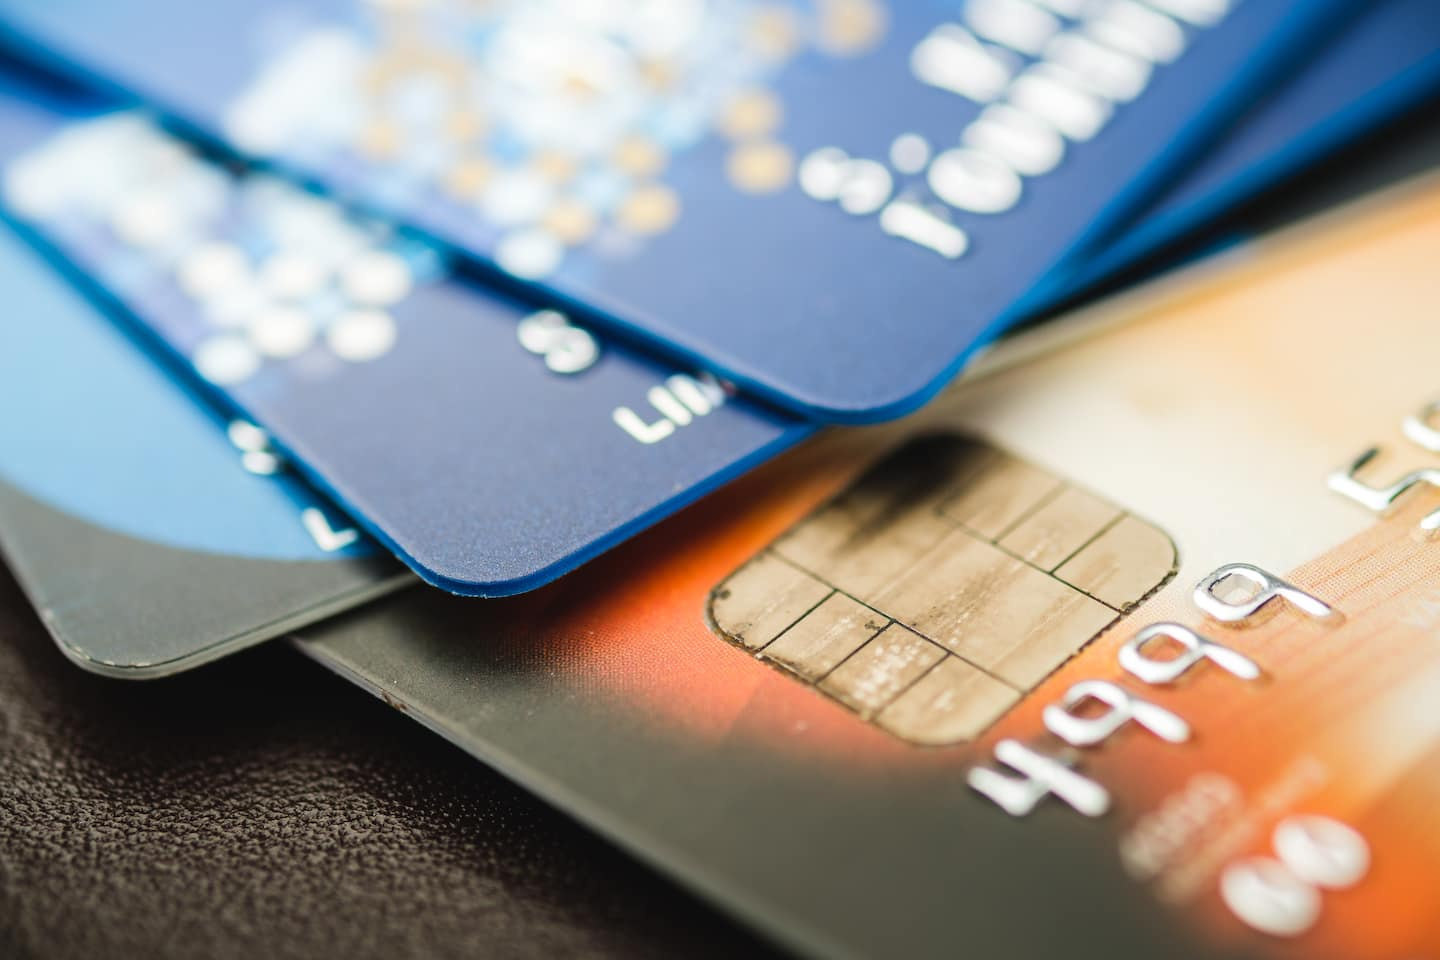 The minimum payment on your credit card will be higher tomorrow